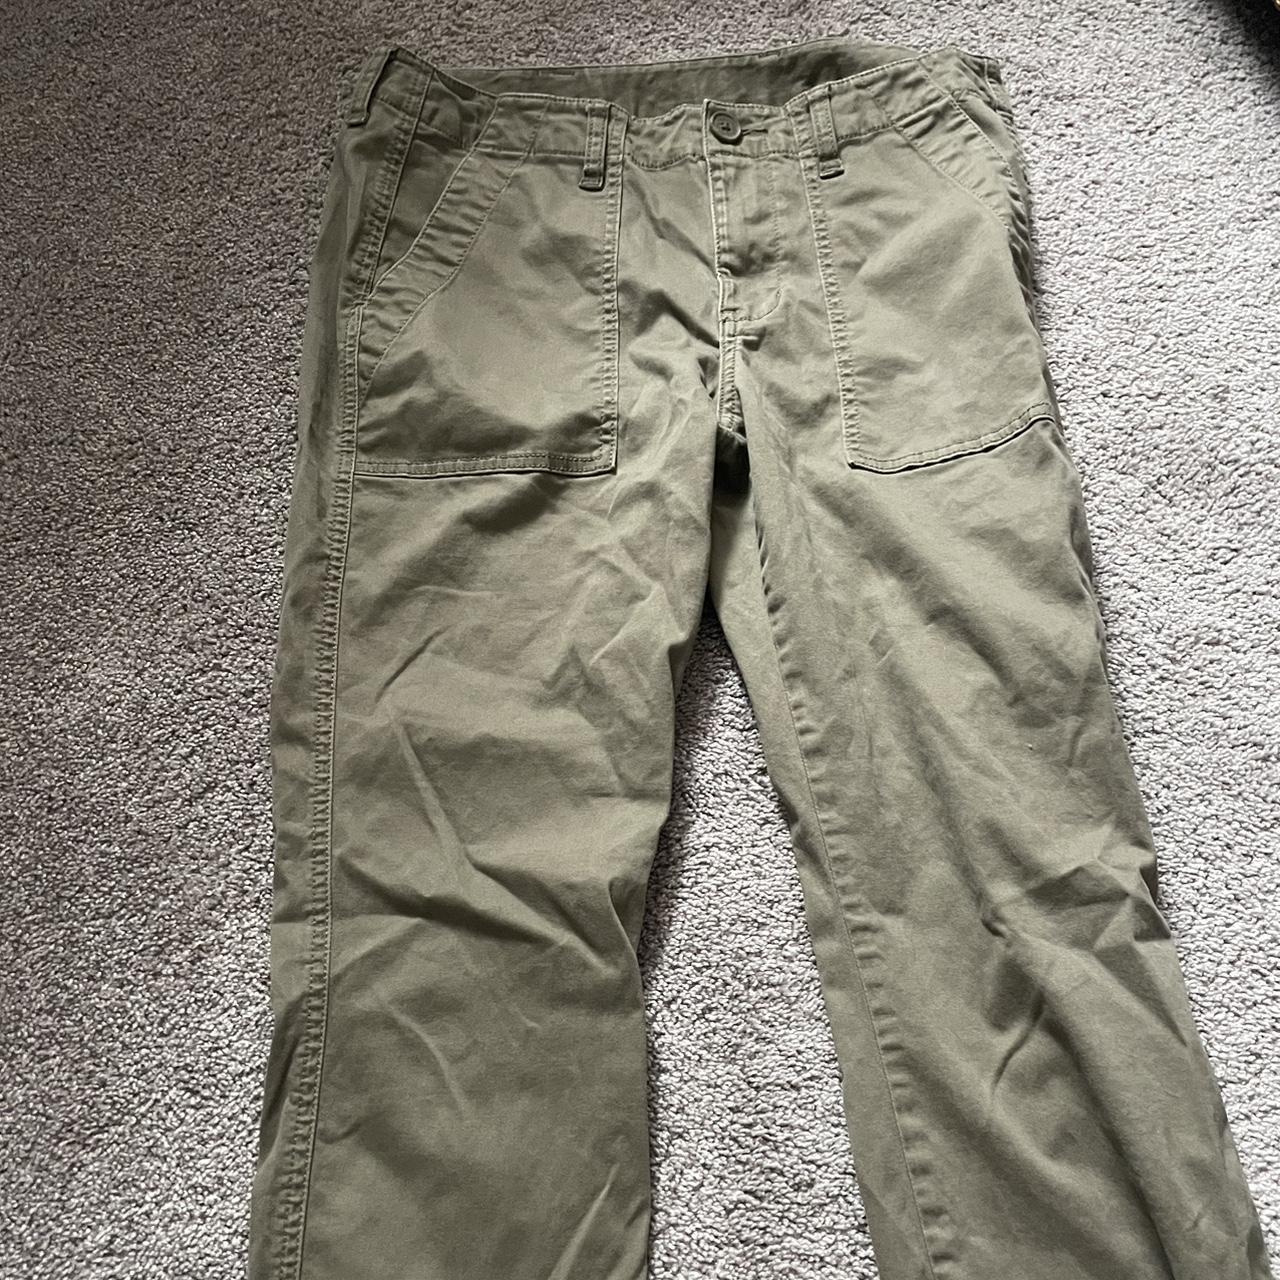 Green cargo style pants FREE SHIPPING! - Depop